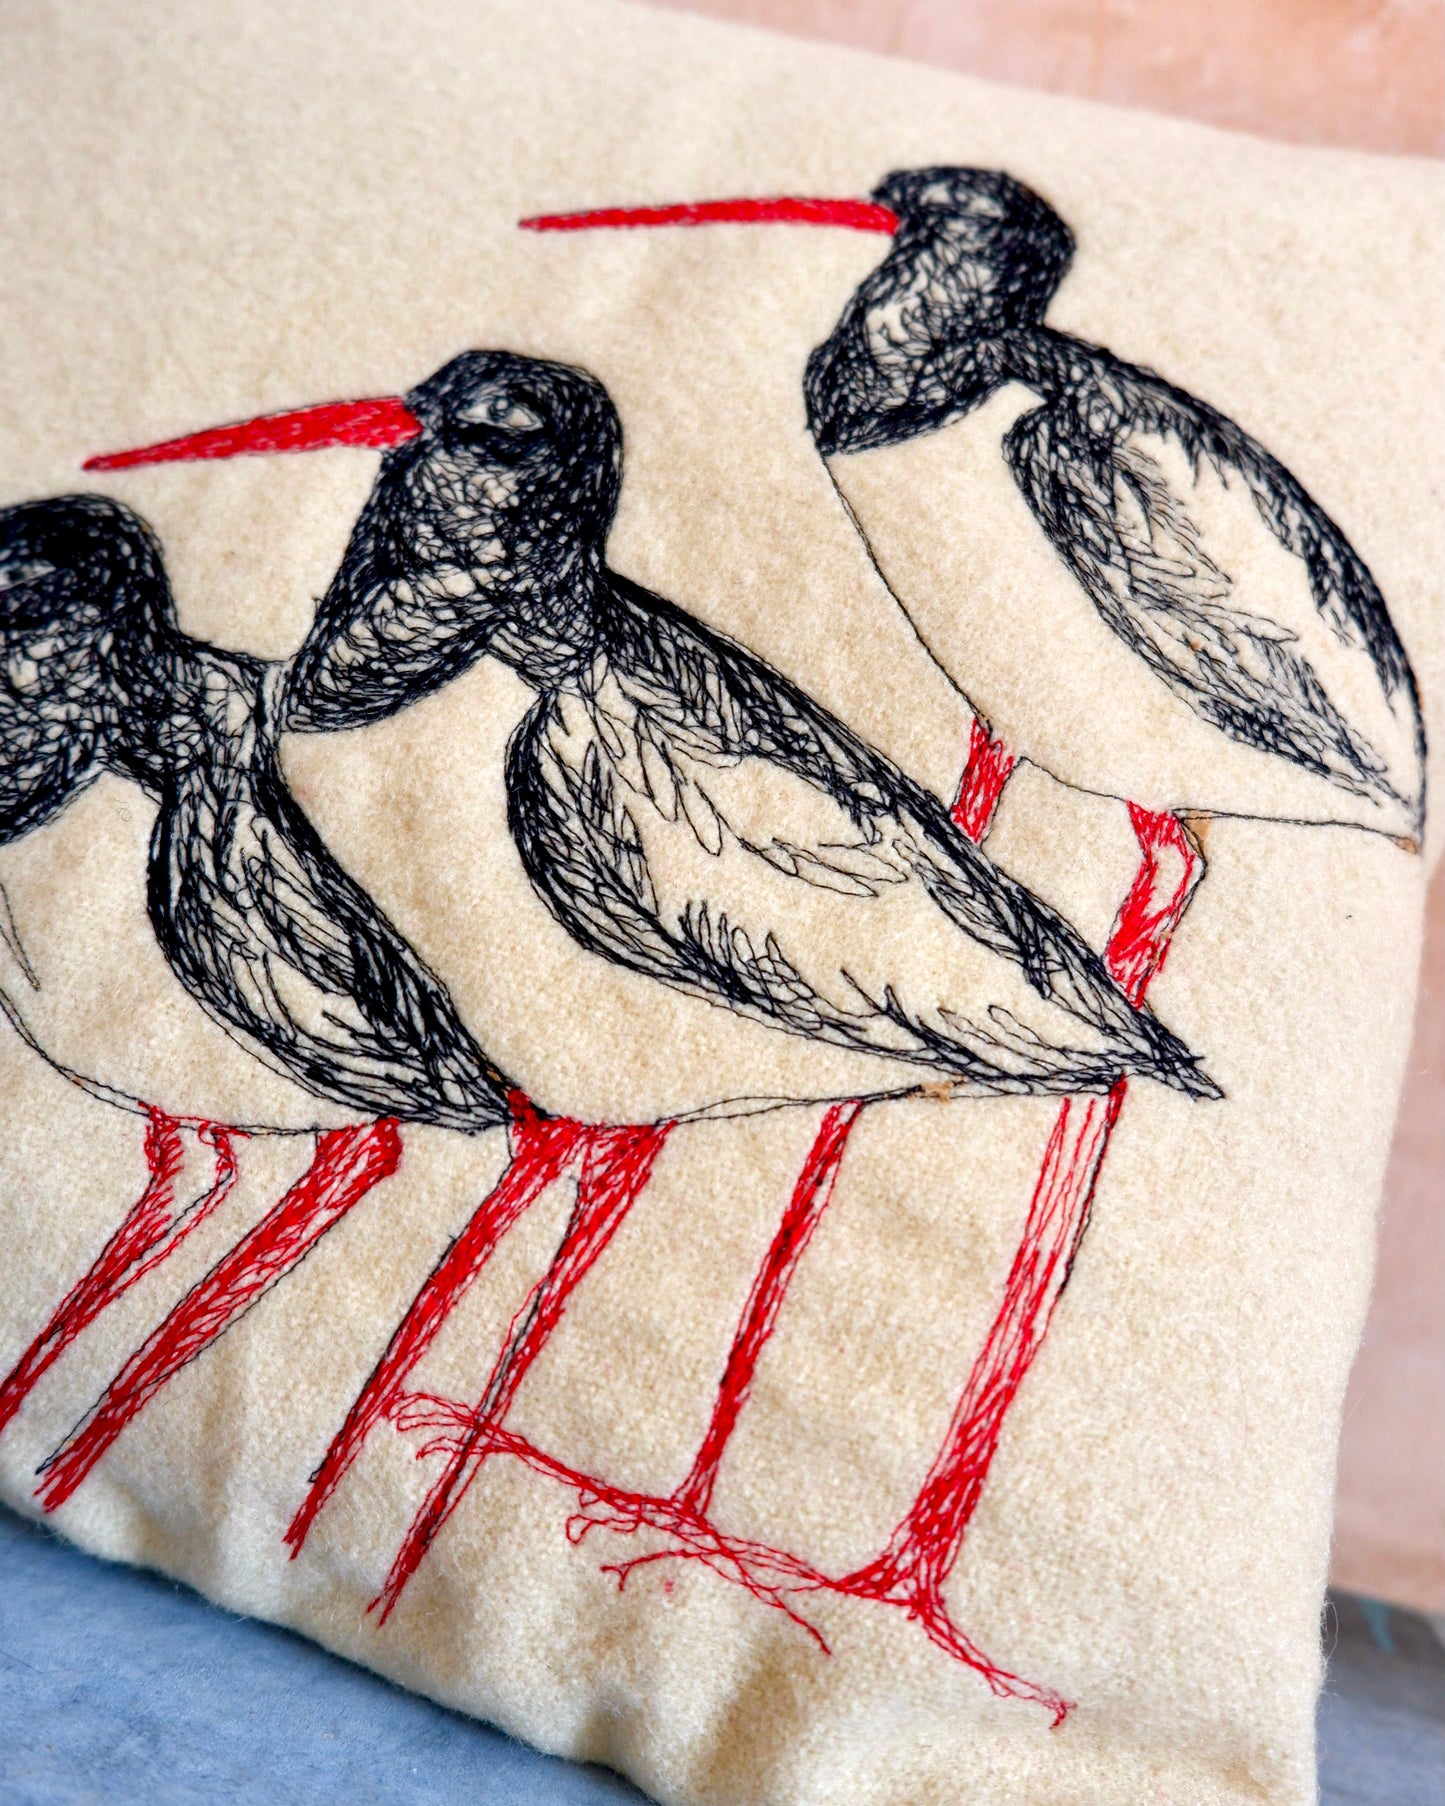 anna osbourne the speculating rook textiles embroidery screen print homeware Oystercatchers Cushion